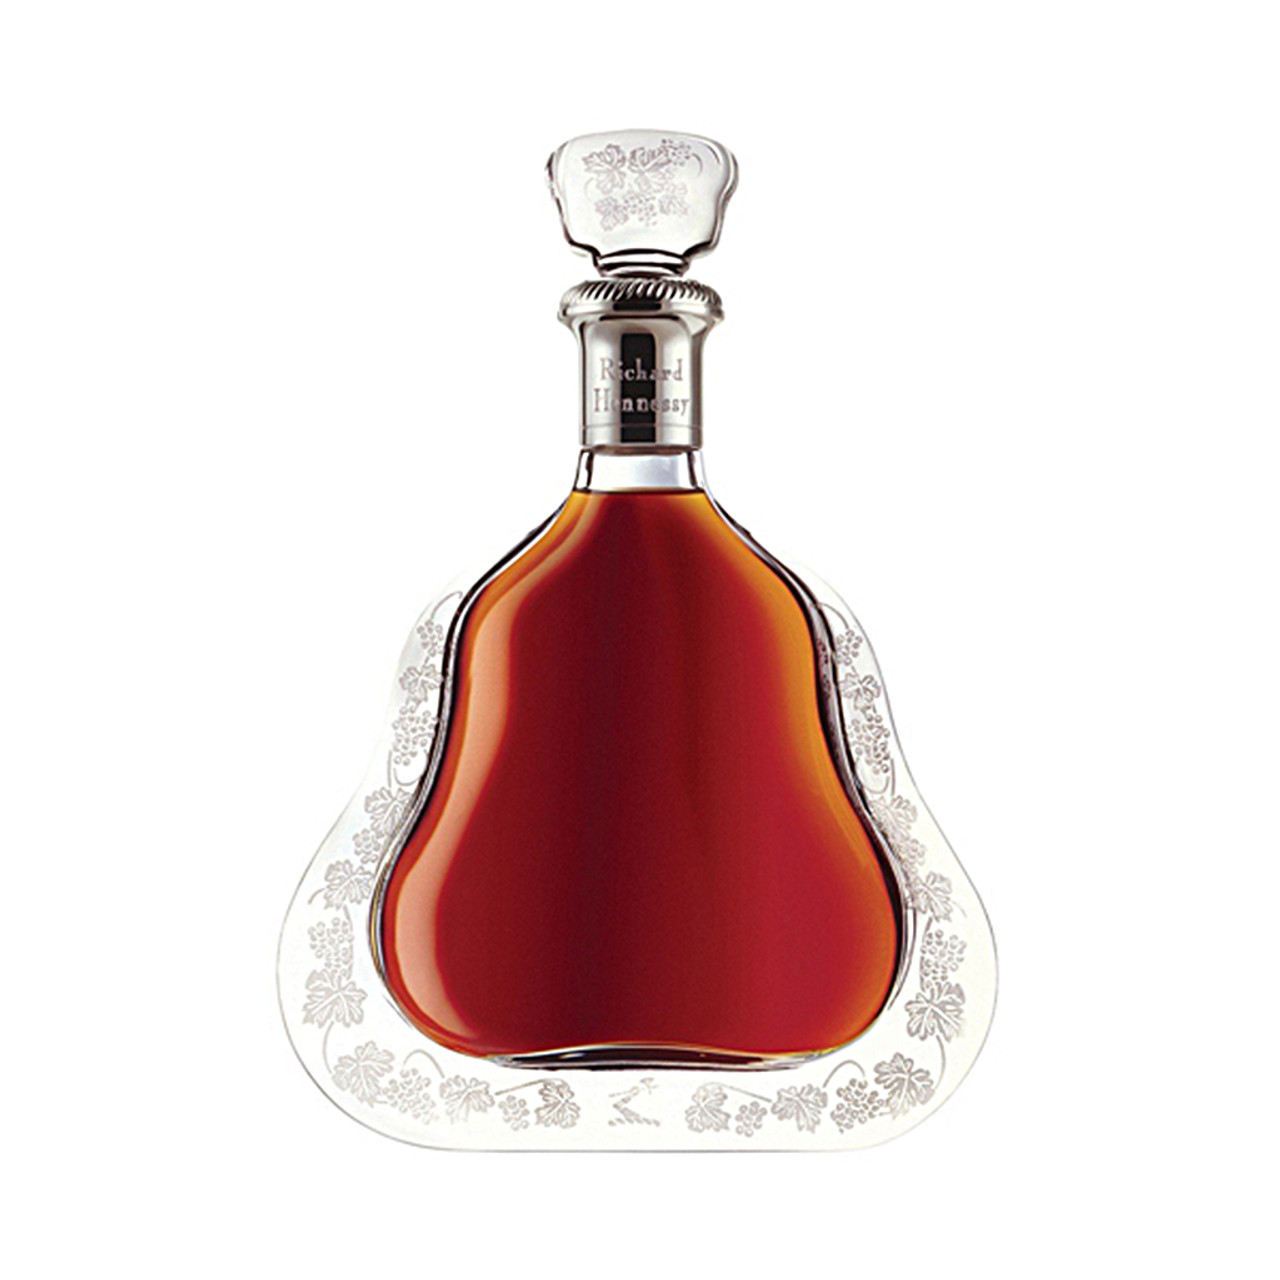 Hennessy Cognac VS – Wine Chateau